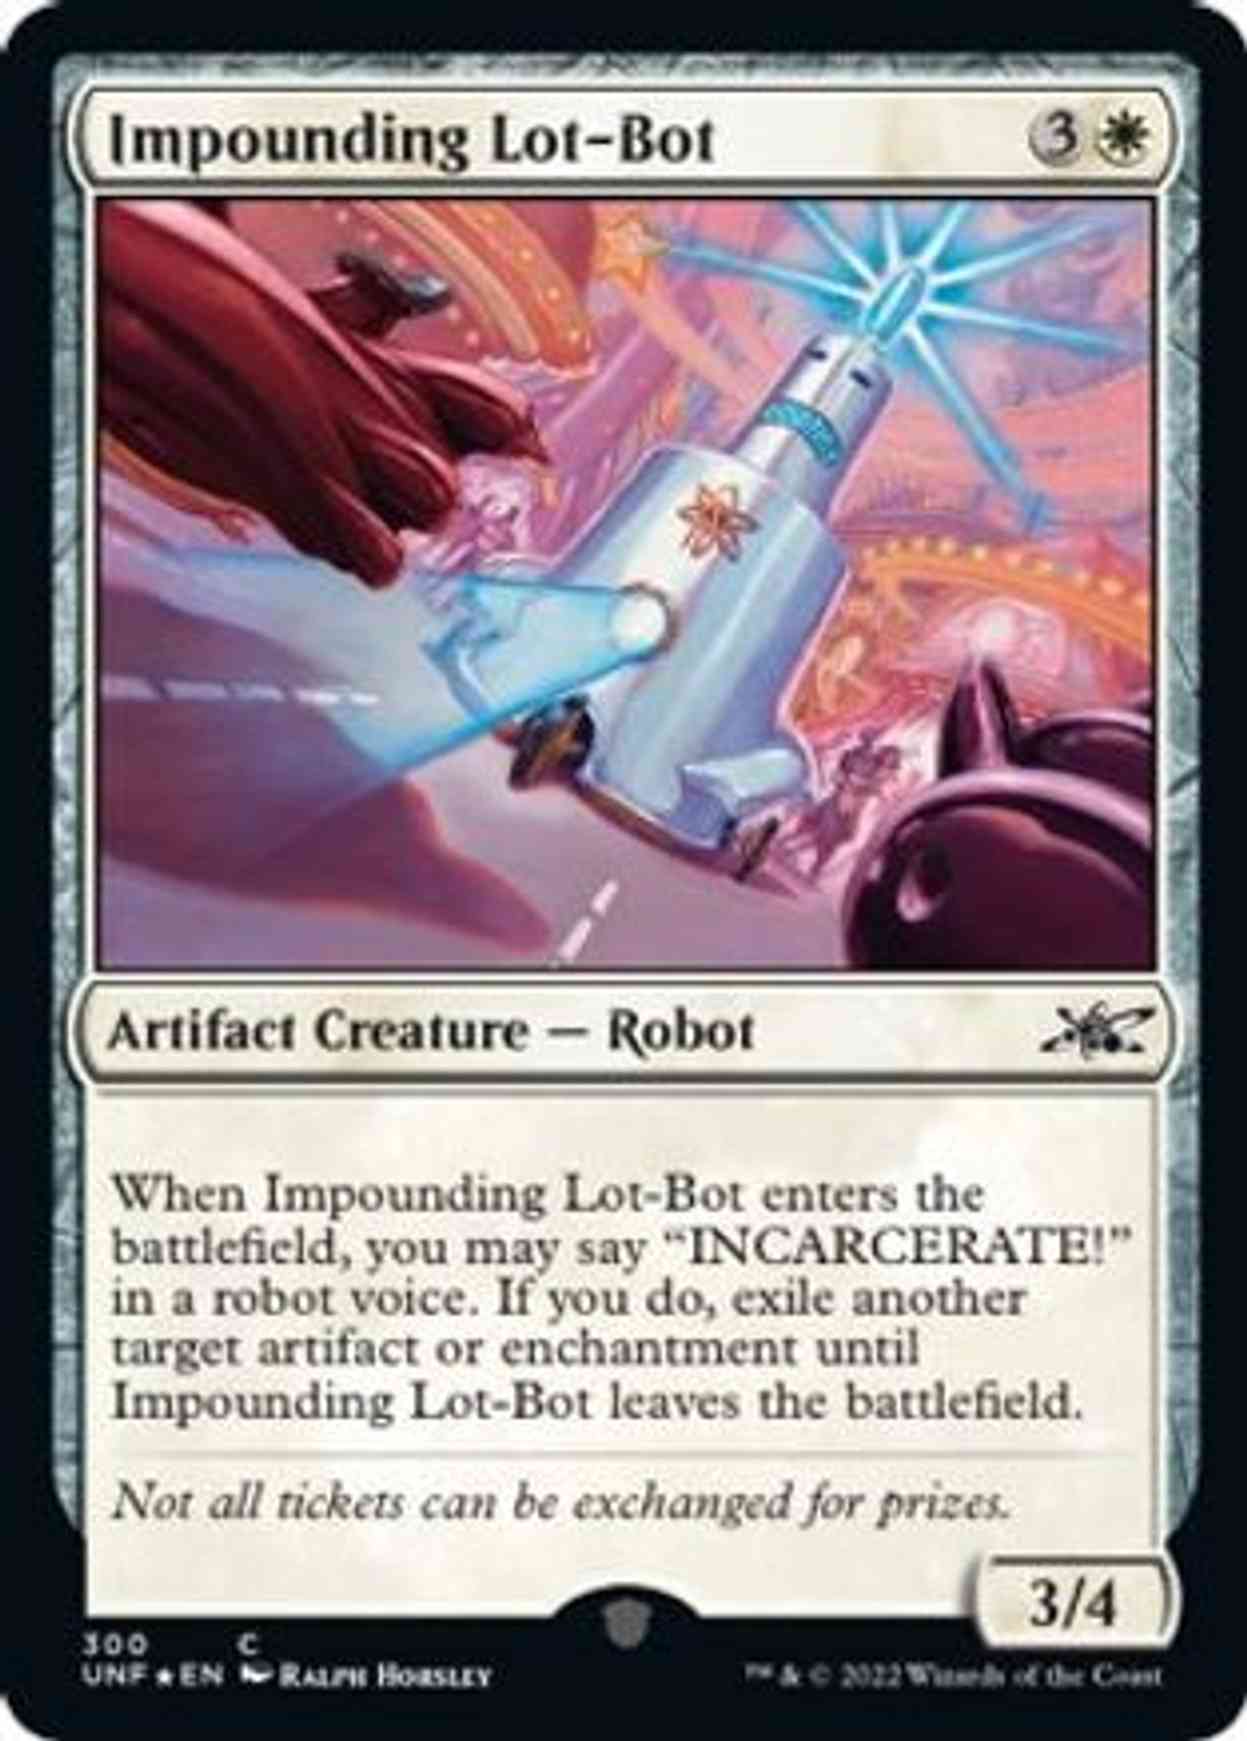 Impounding Lot-Bot (Galaxy Foil) magic card front